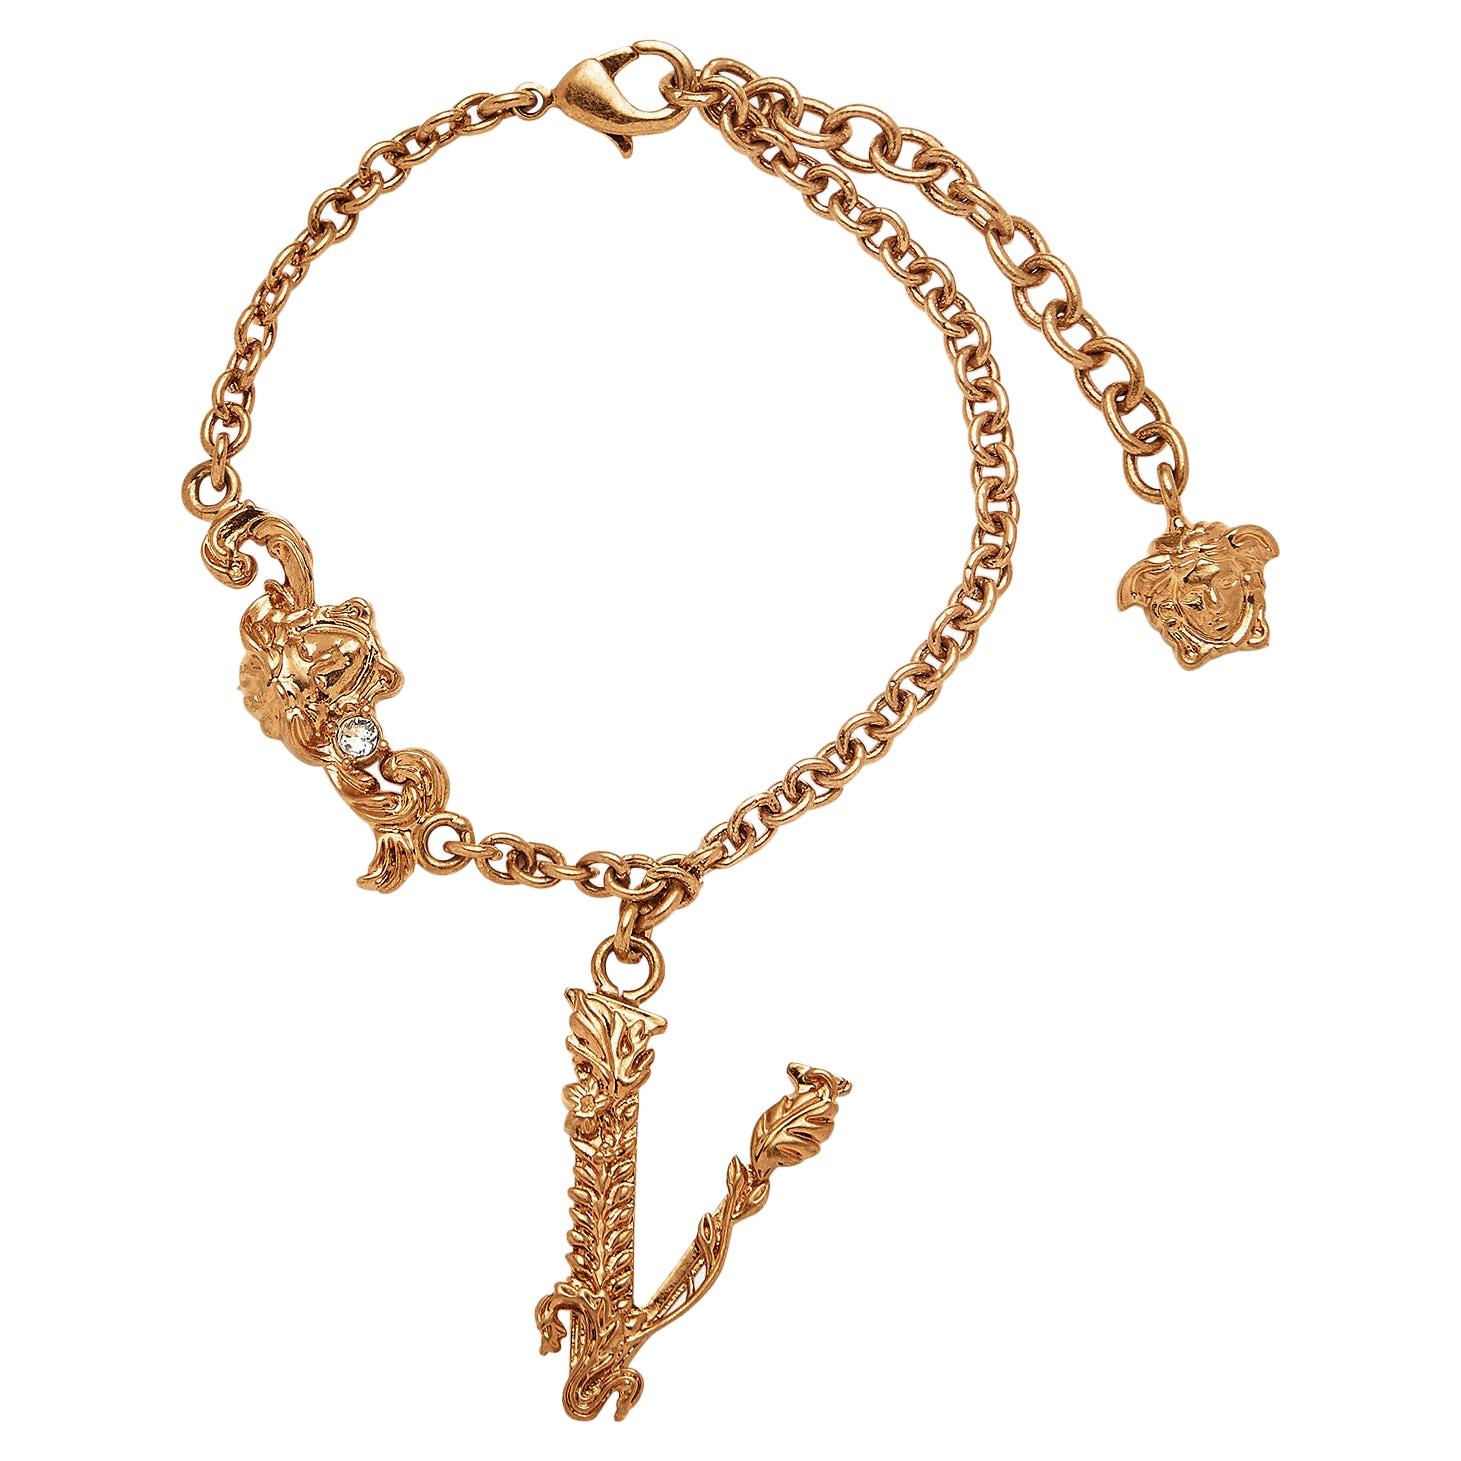 Versace Tribute Gold Bracelet with Medusa Accent and Virtus Charm